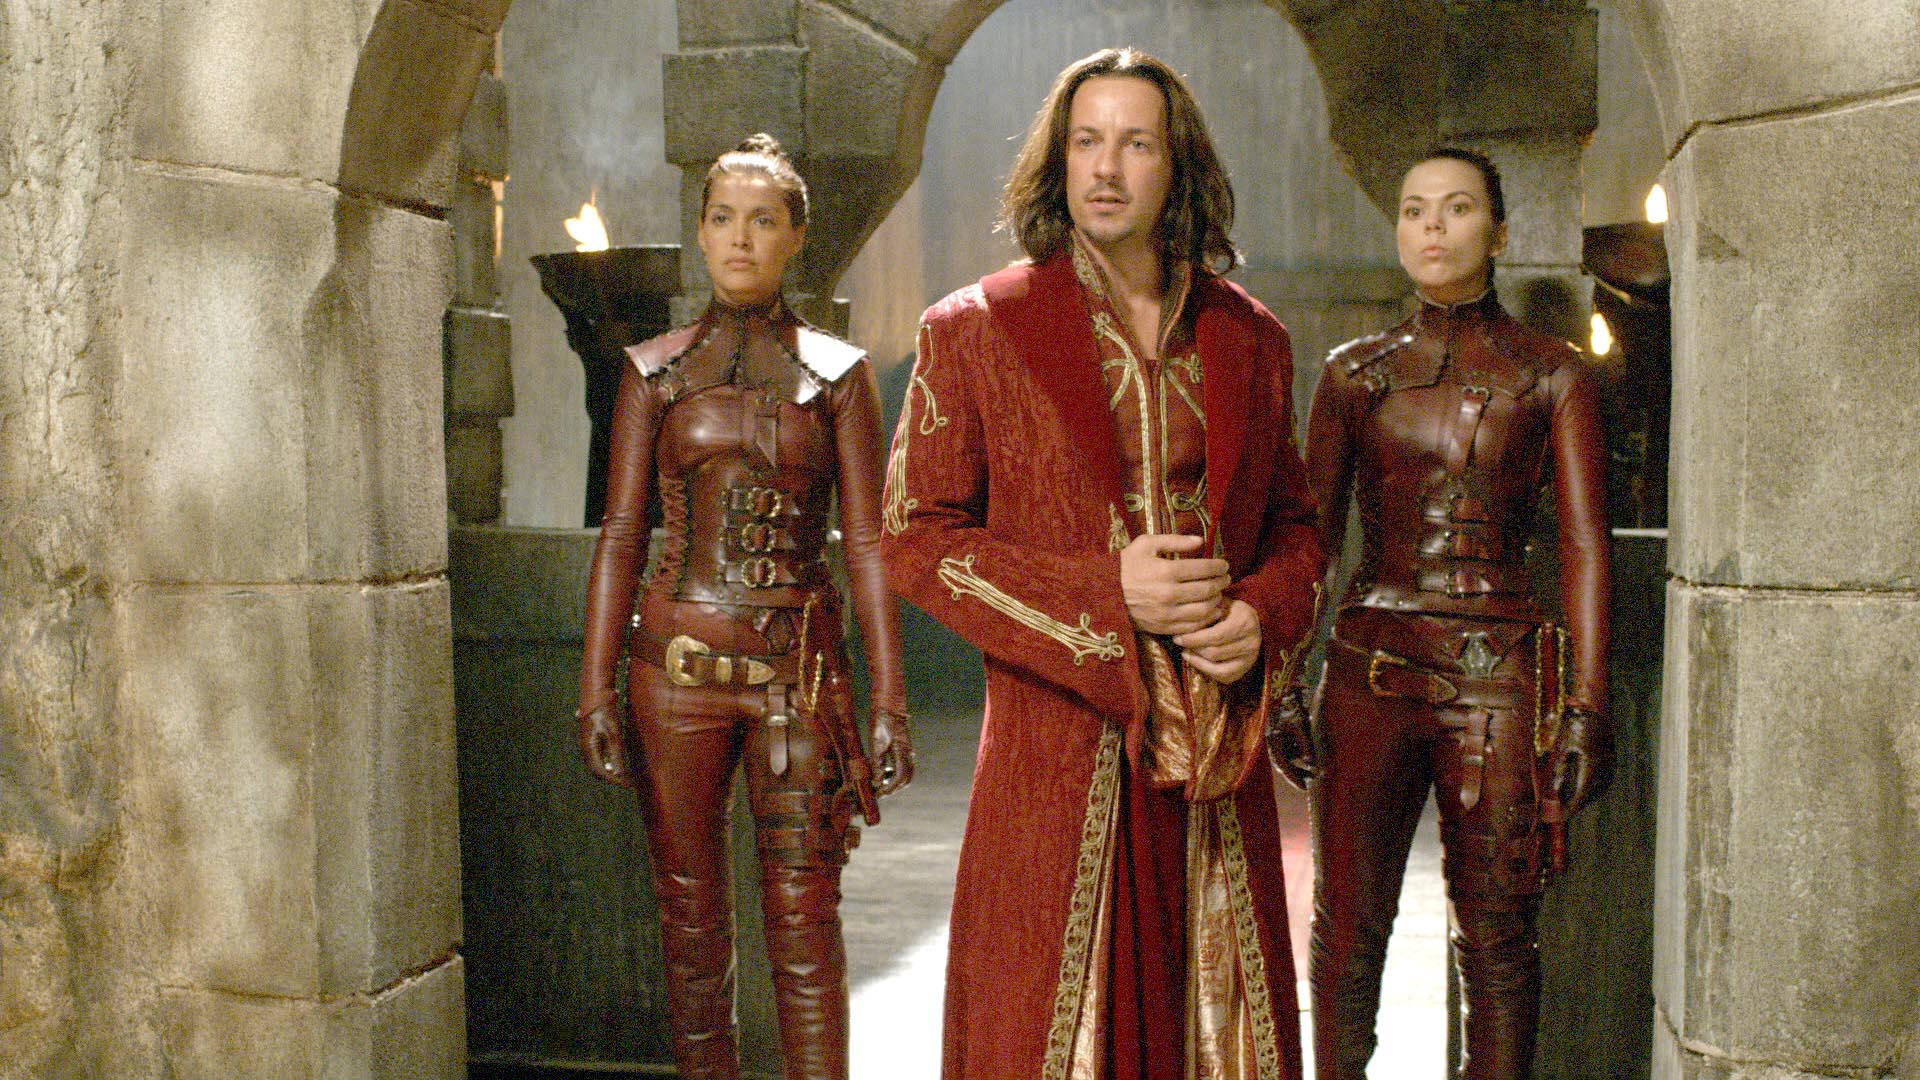 Looking for magically wonderful TV shows like Legend of the Seeker? Check out these 4 great shows that are begging for you to binge on them!